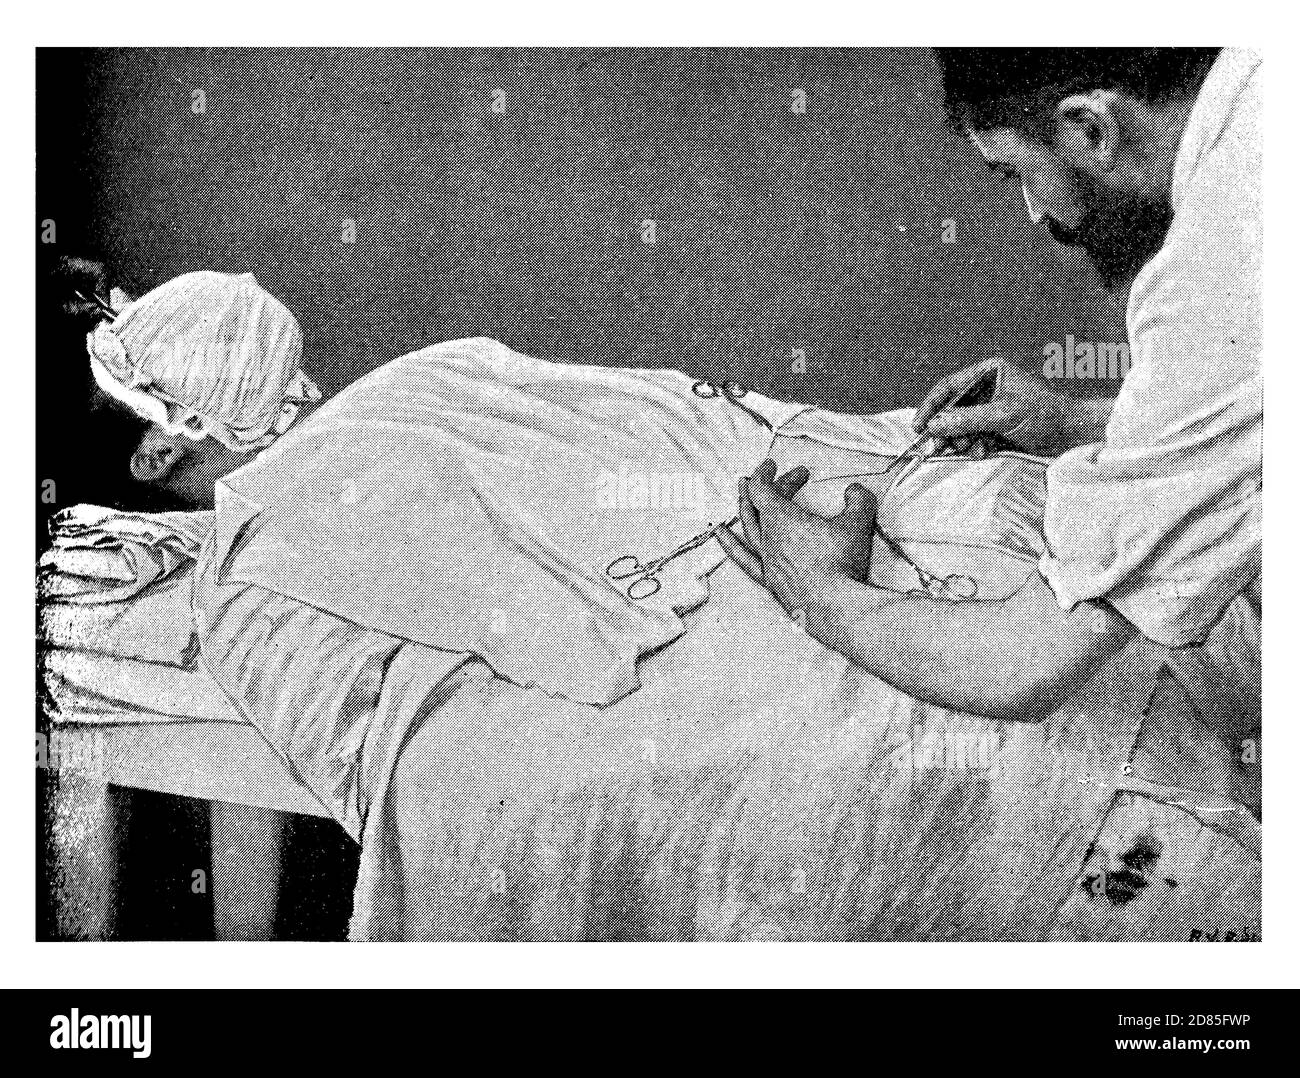 Healthcare and medicine vintage illustration: surgical removal of the appendix with an open incision in the abdomen (laparotomy) Stock Photo